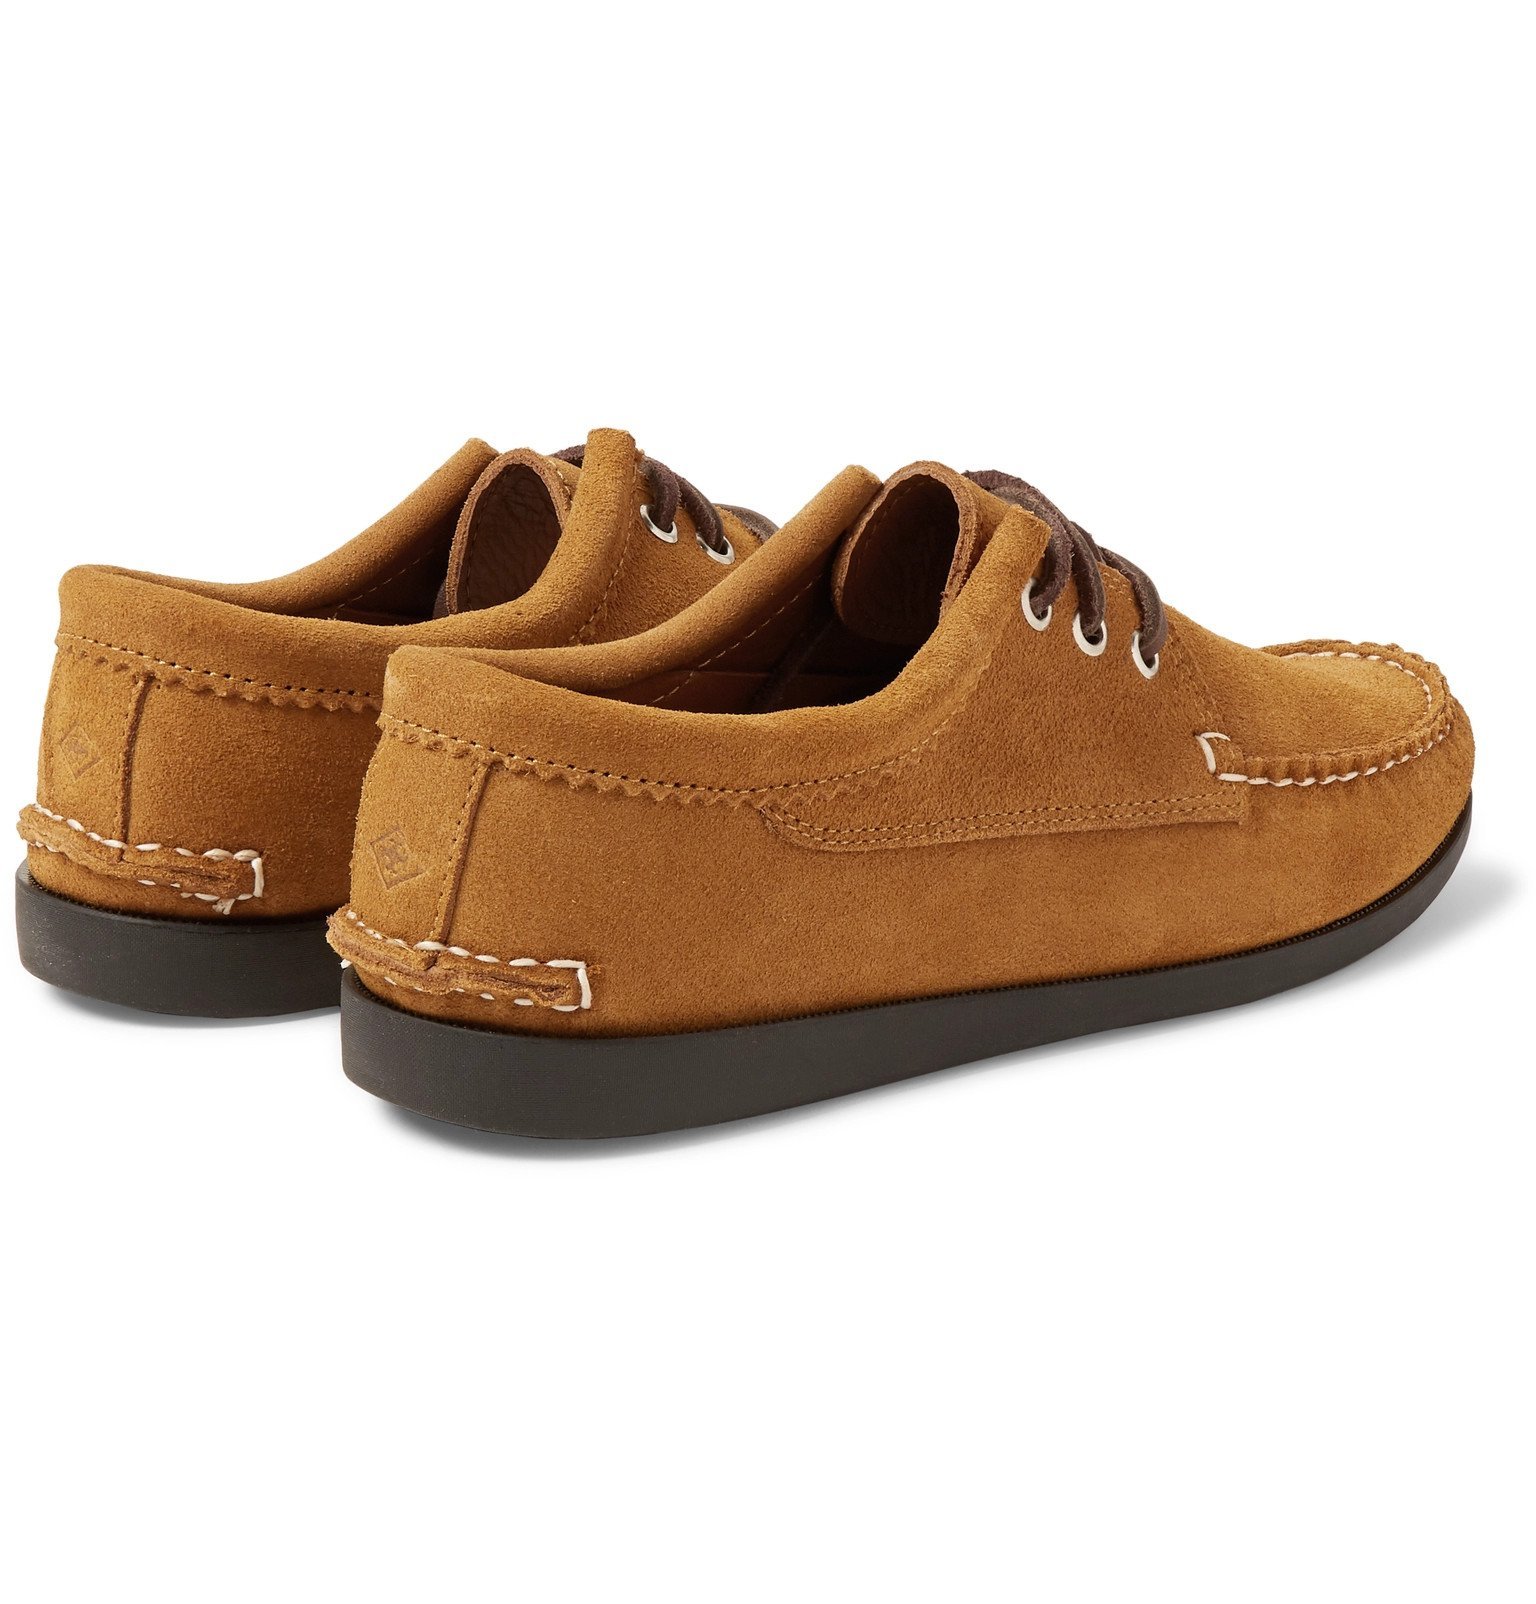 Quoddy - Blucher Suede Boat Shoes - Brown Quoddy